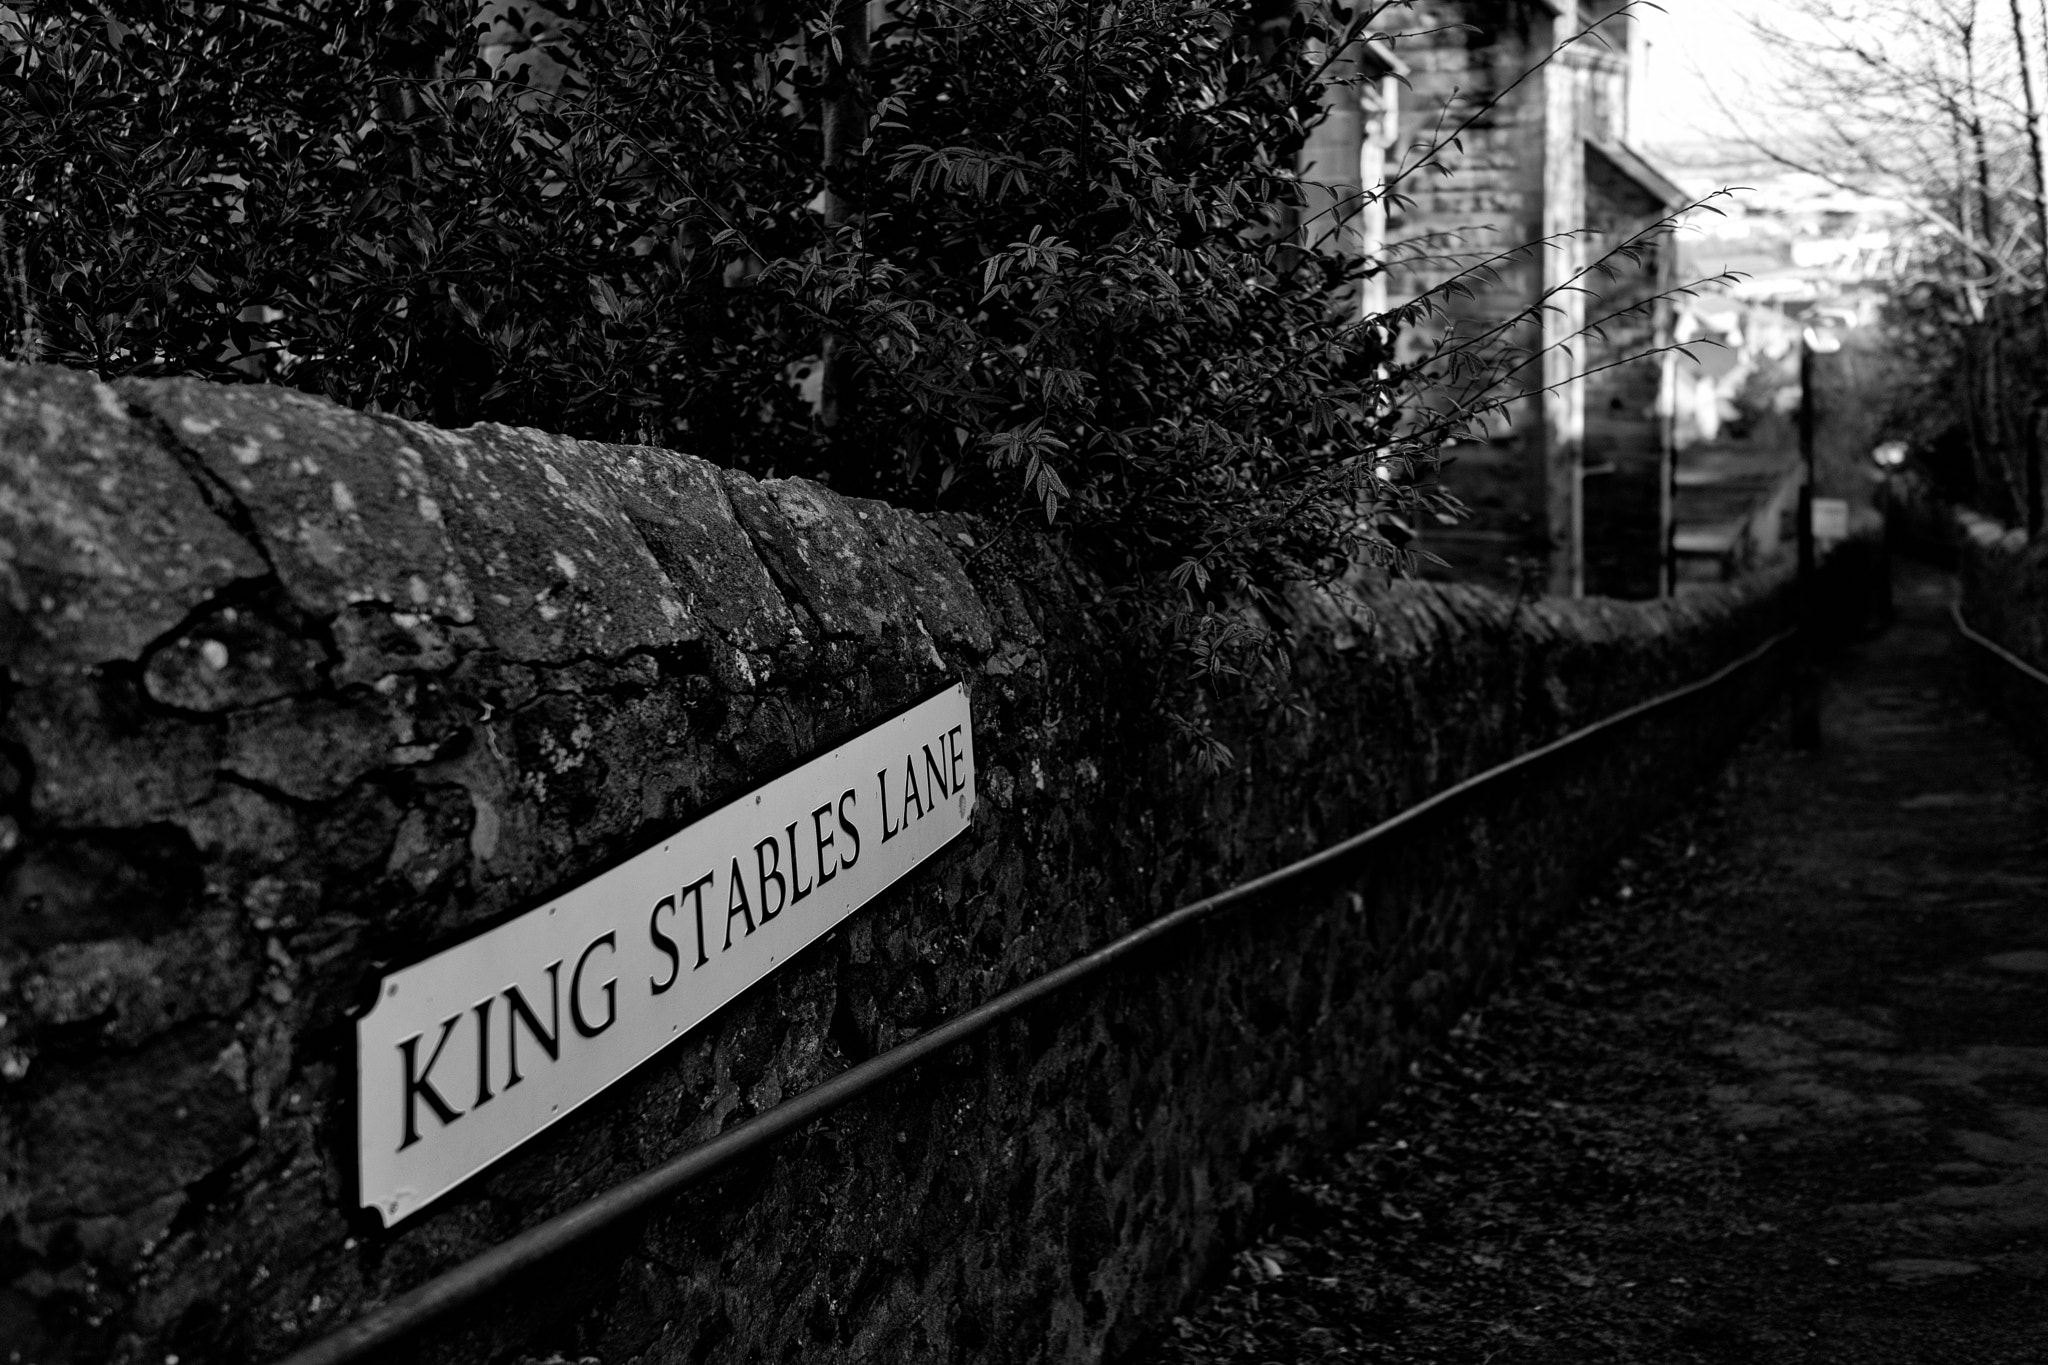 Sony Cyber-shot DSC-RX1 sample photo. King stables lane photography